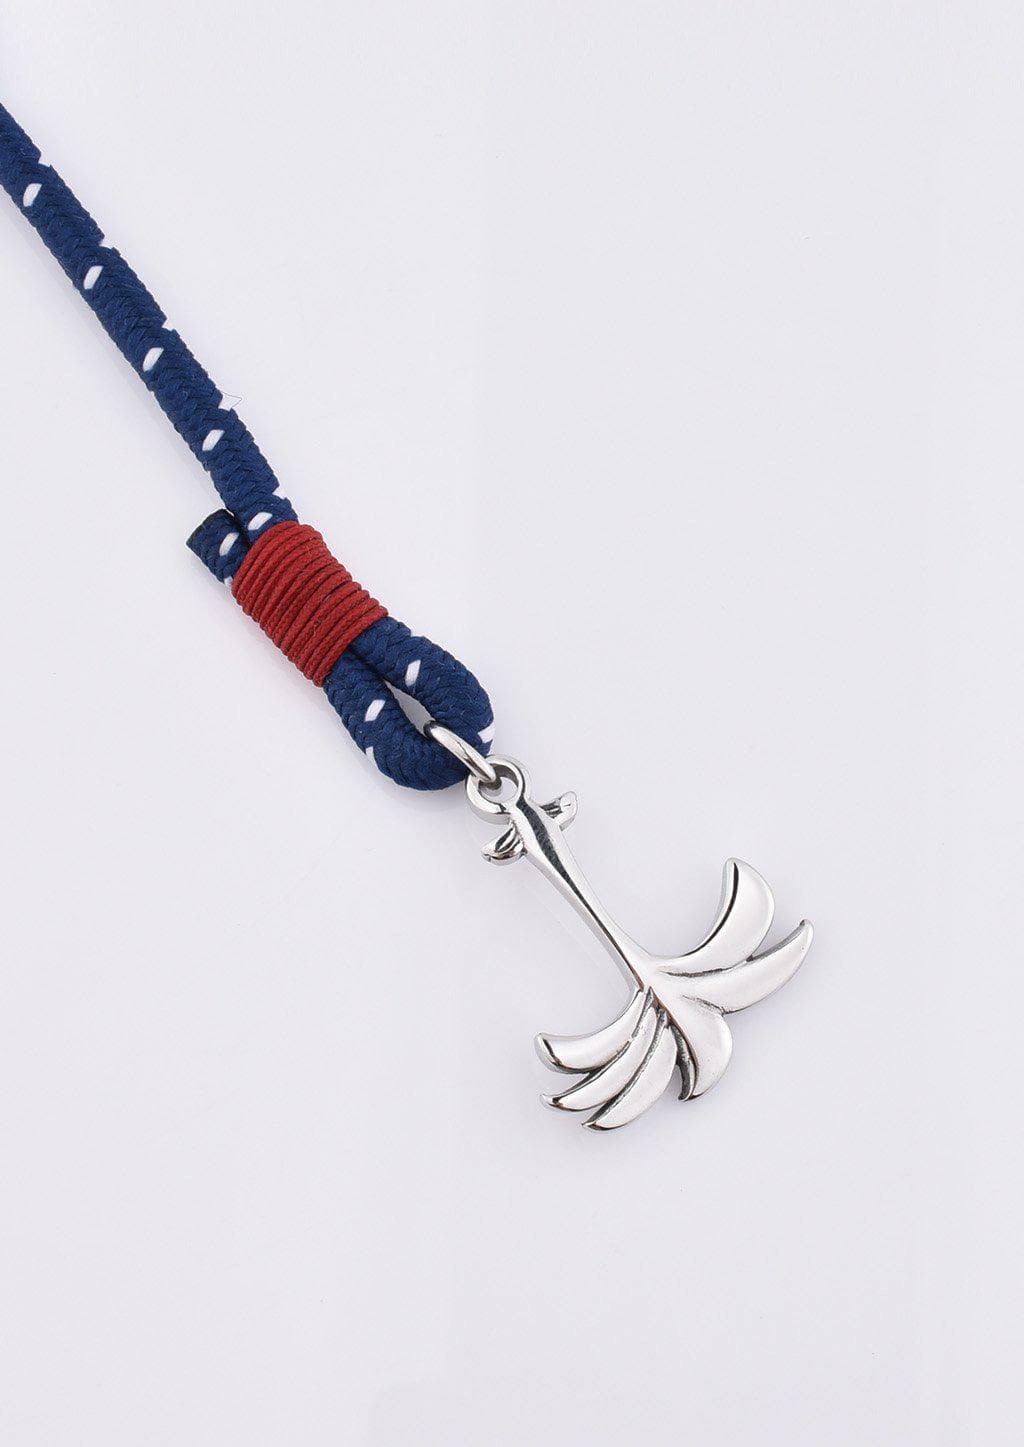 Voyager - Single - Season two Palm anchor bracelet with blue and red nylon band. Close up on palm.